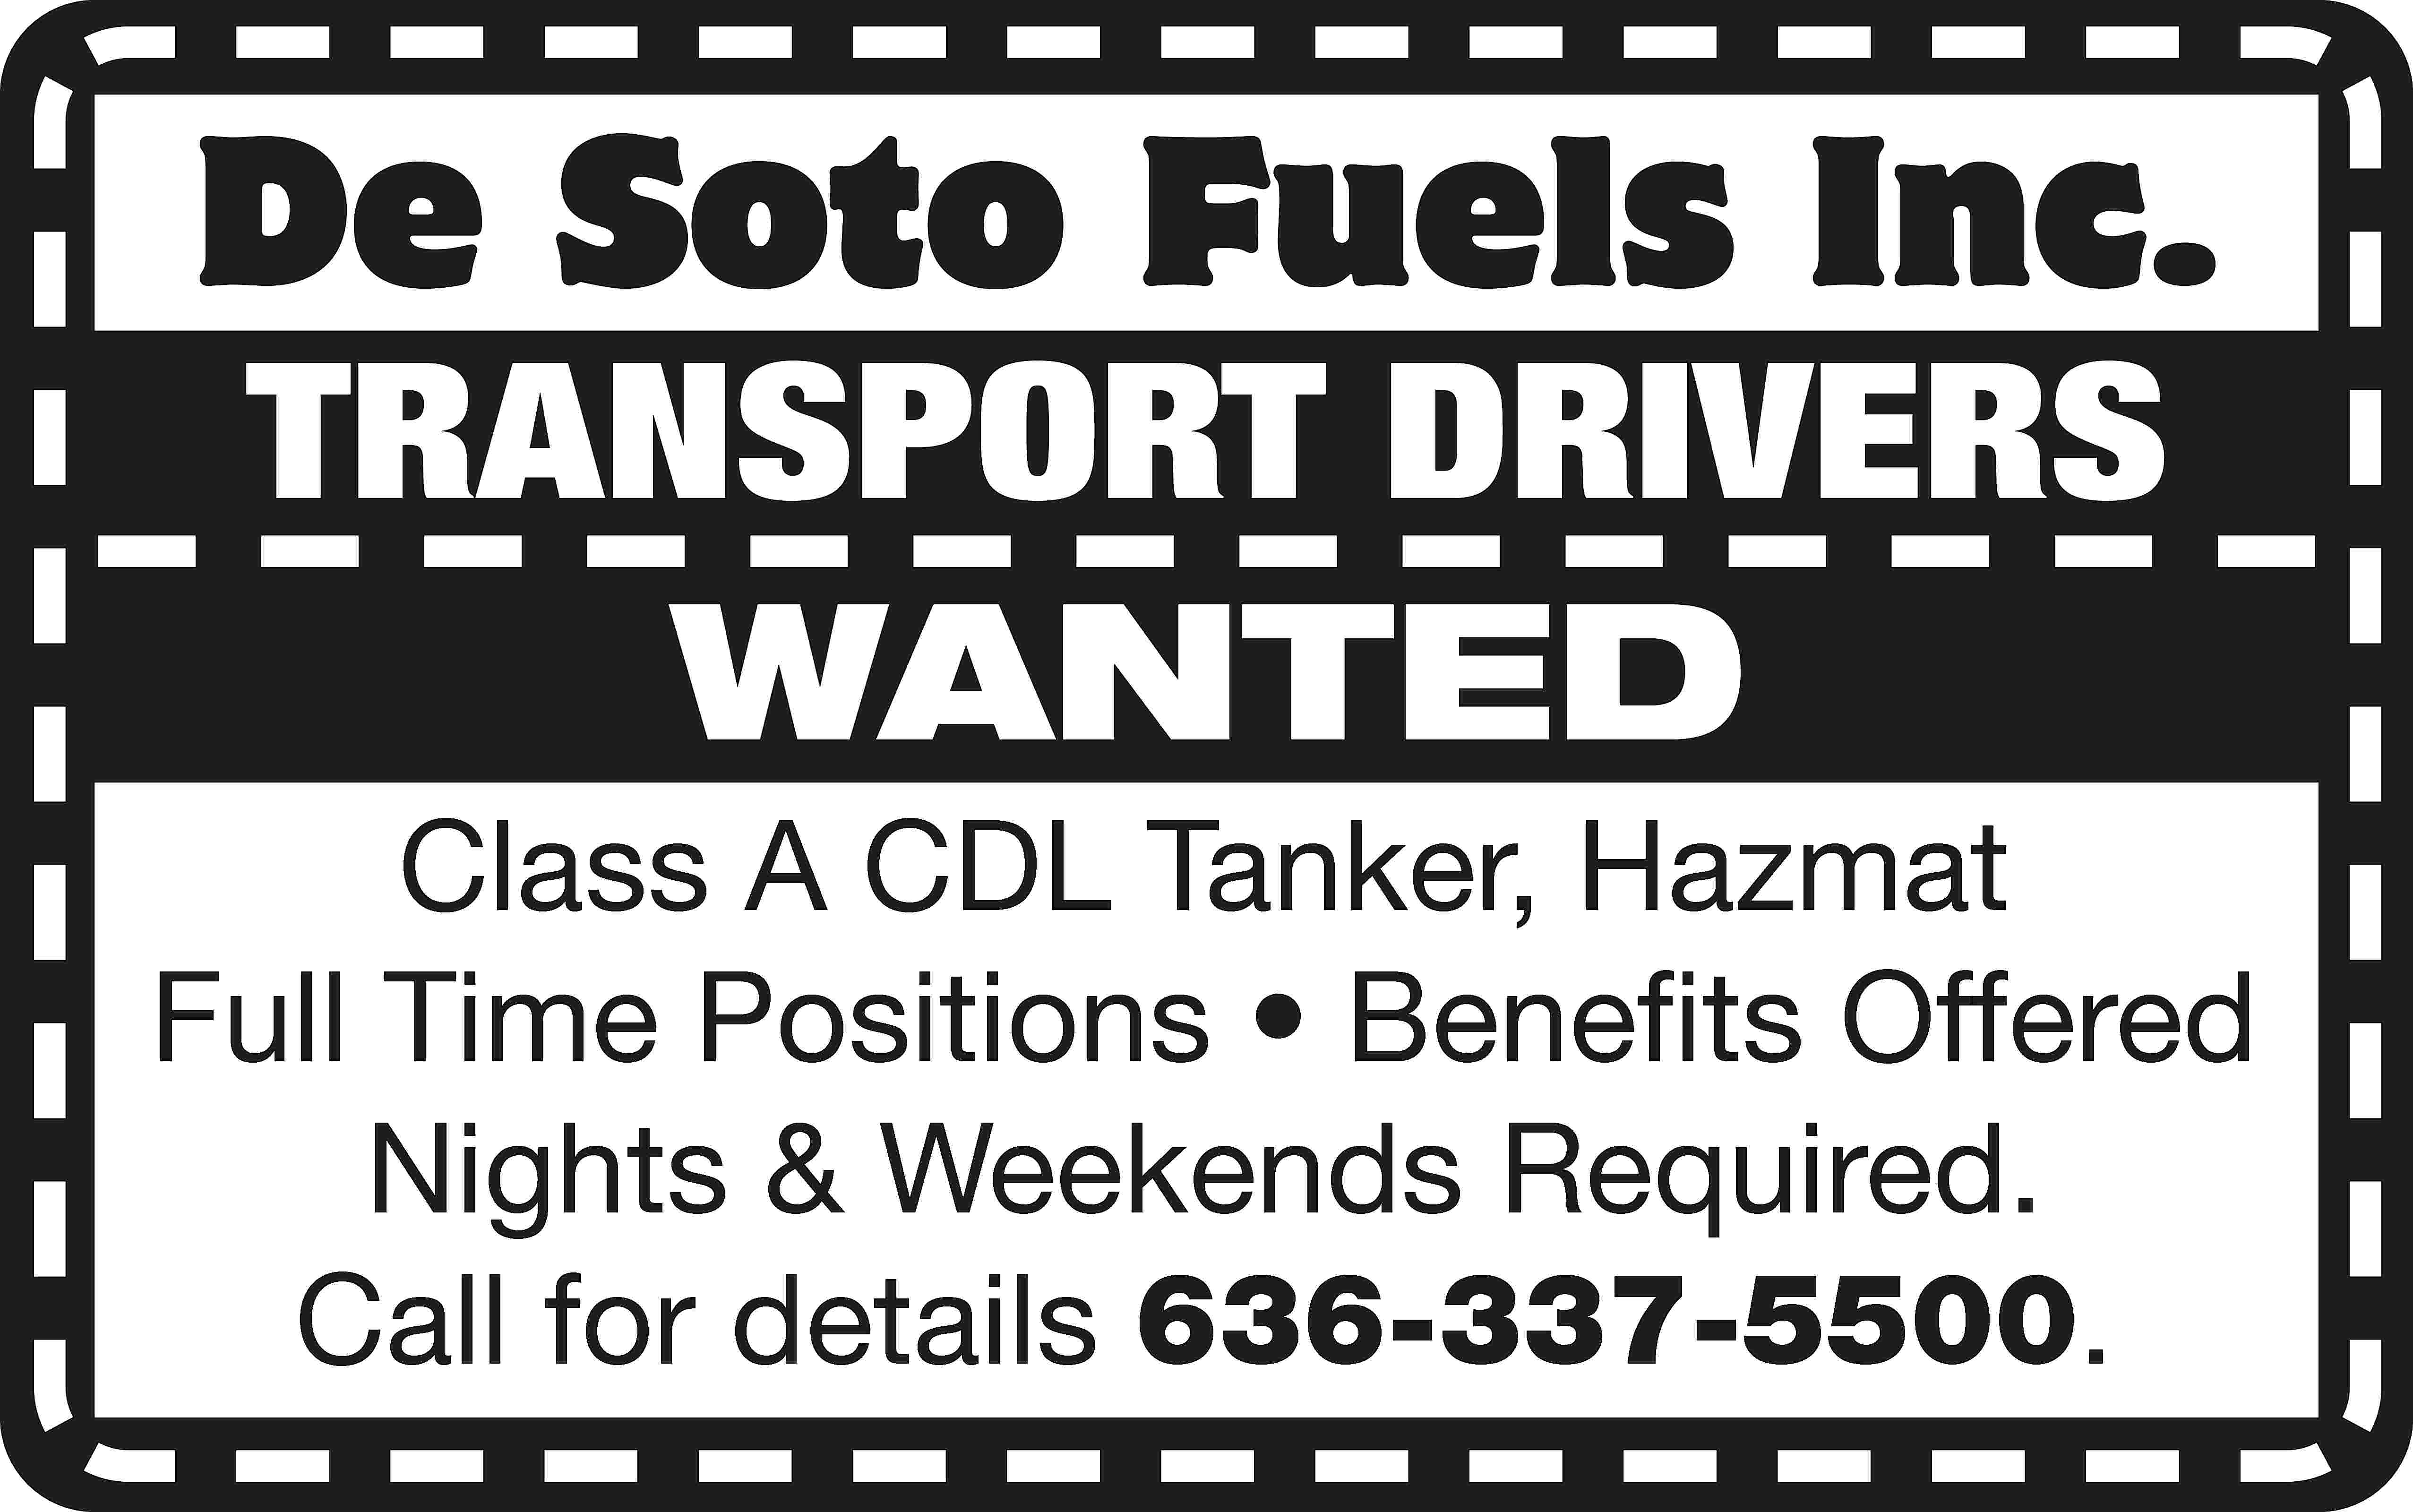 De Soto Fuels Inc. TRANSPORT  De Soto Fuels Inc. TRANSPORT DRIVERS WANTED Class A CDL Tanker, Hazmat Full Time Positions • Benefits Offered Nights & Weekends Required. Call for details 636-337-5500.